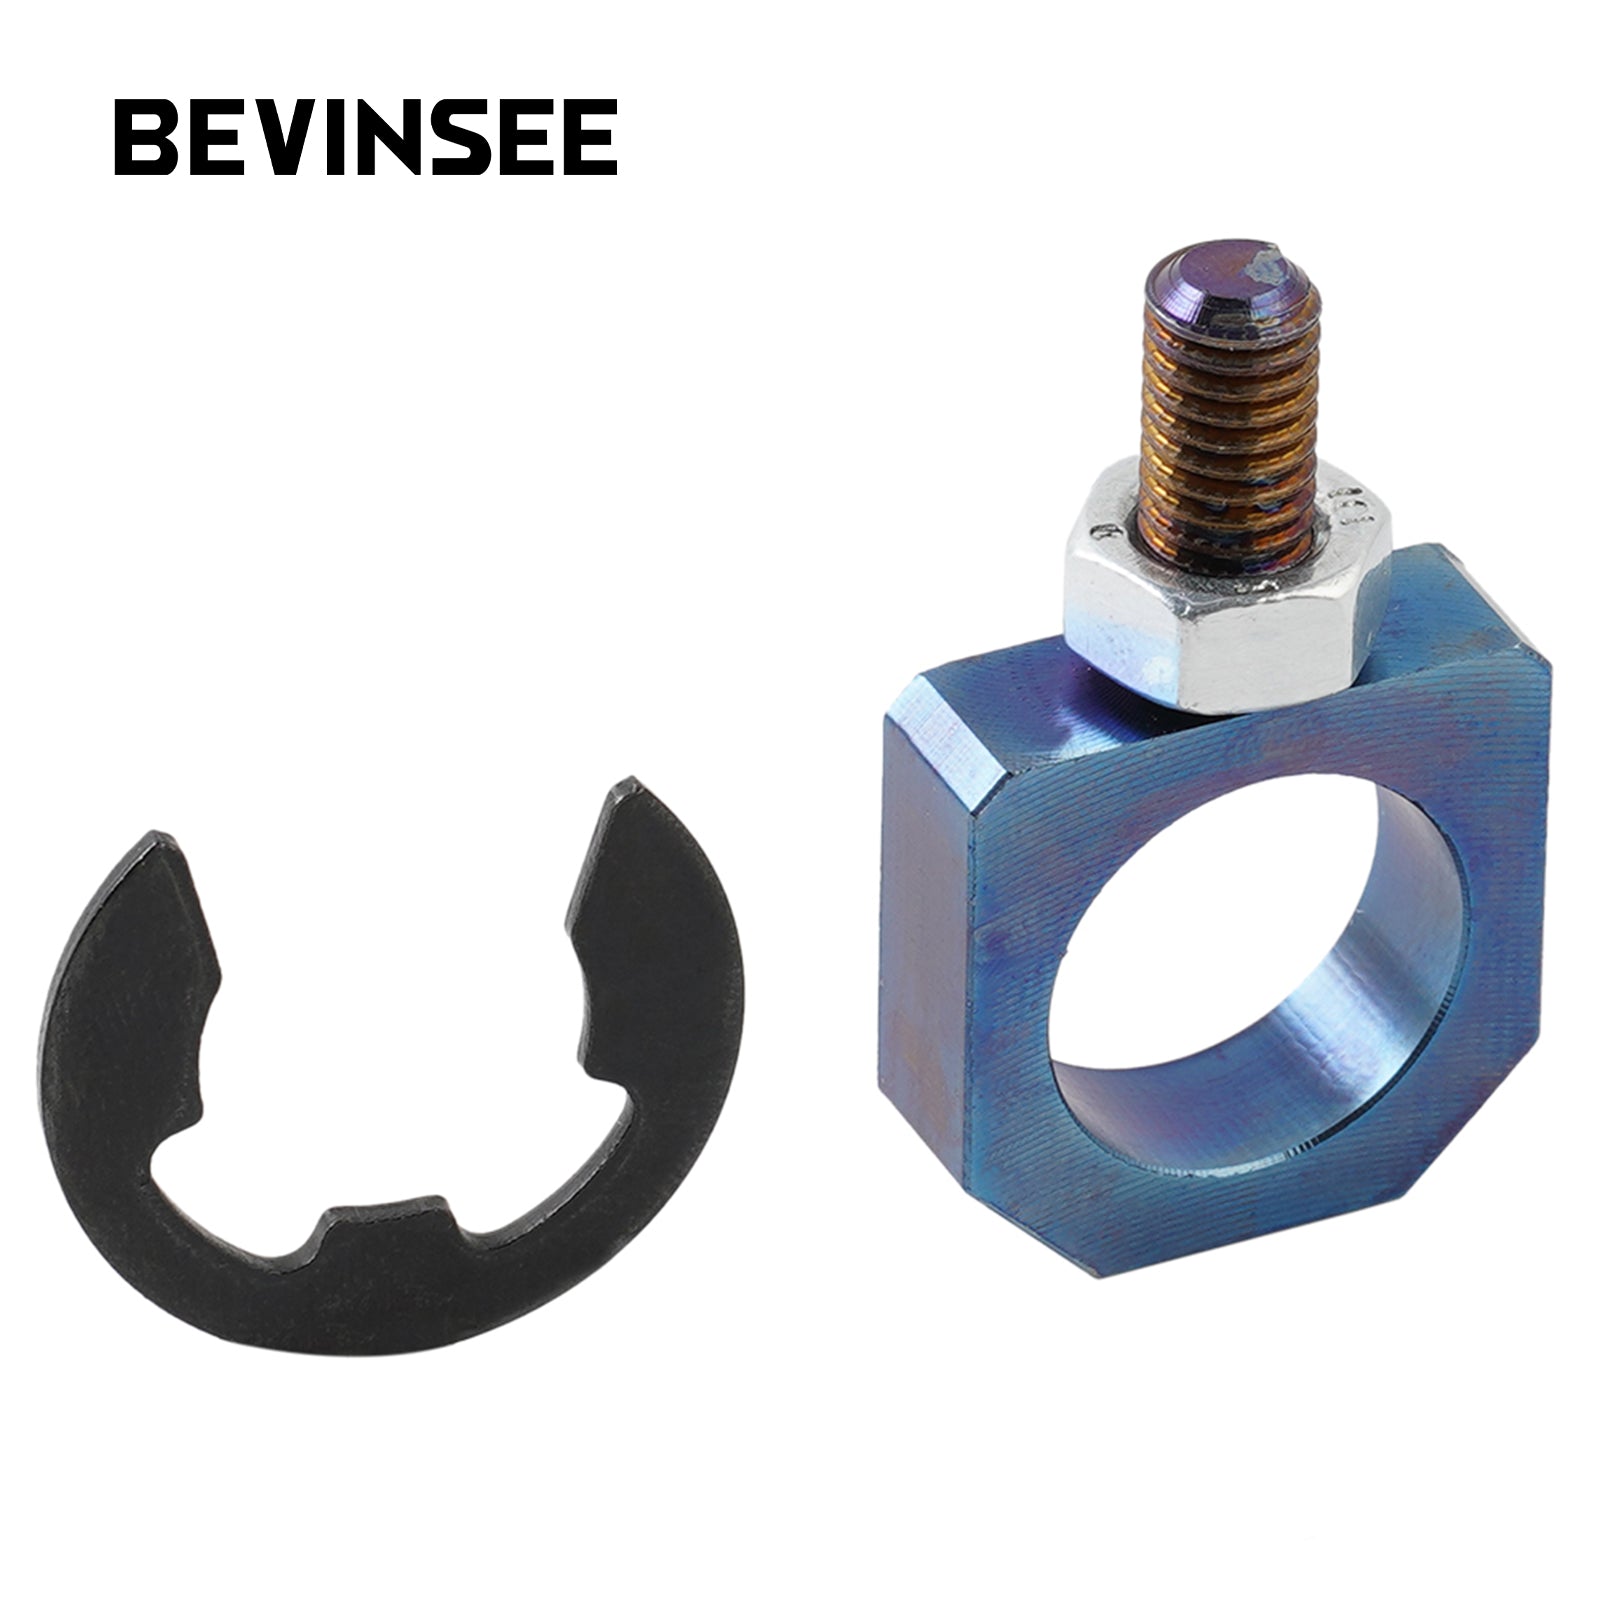 BEVINSEE Grade 8 for Acura RDX Turbo Variable Flow Actuator Eye Bolt & Nut VGT Rod End Link